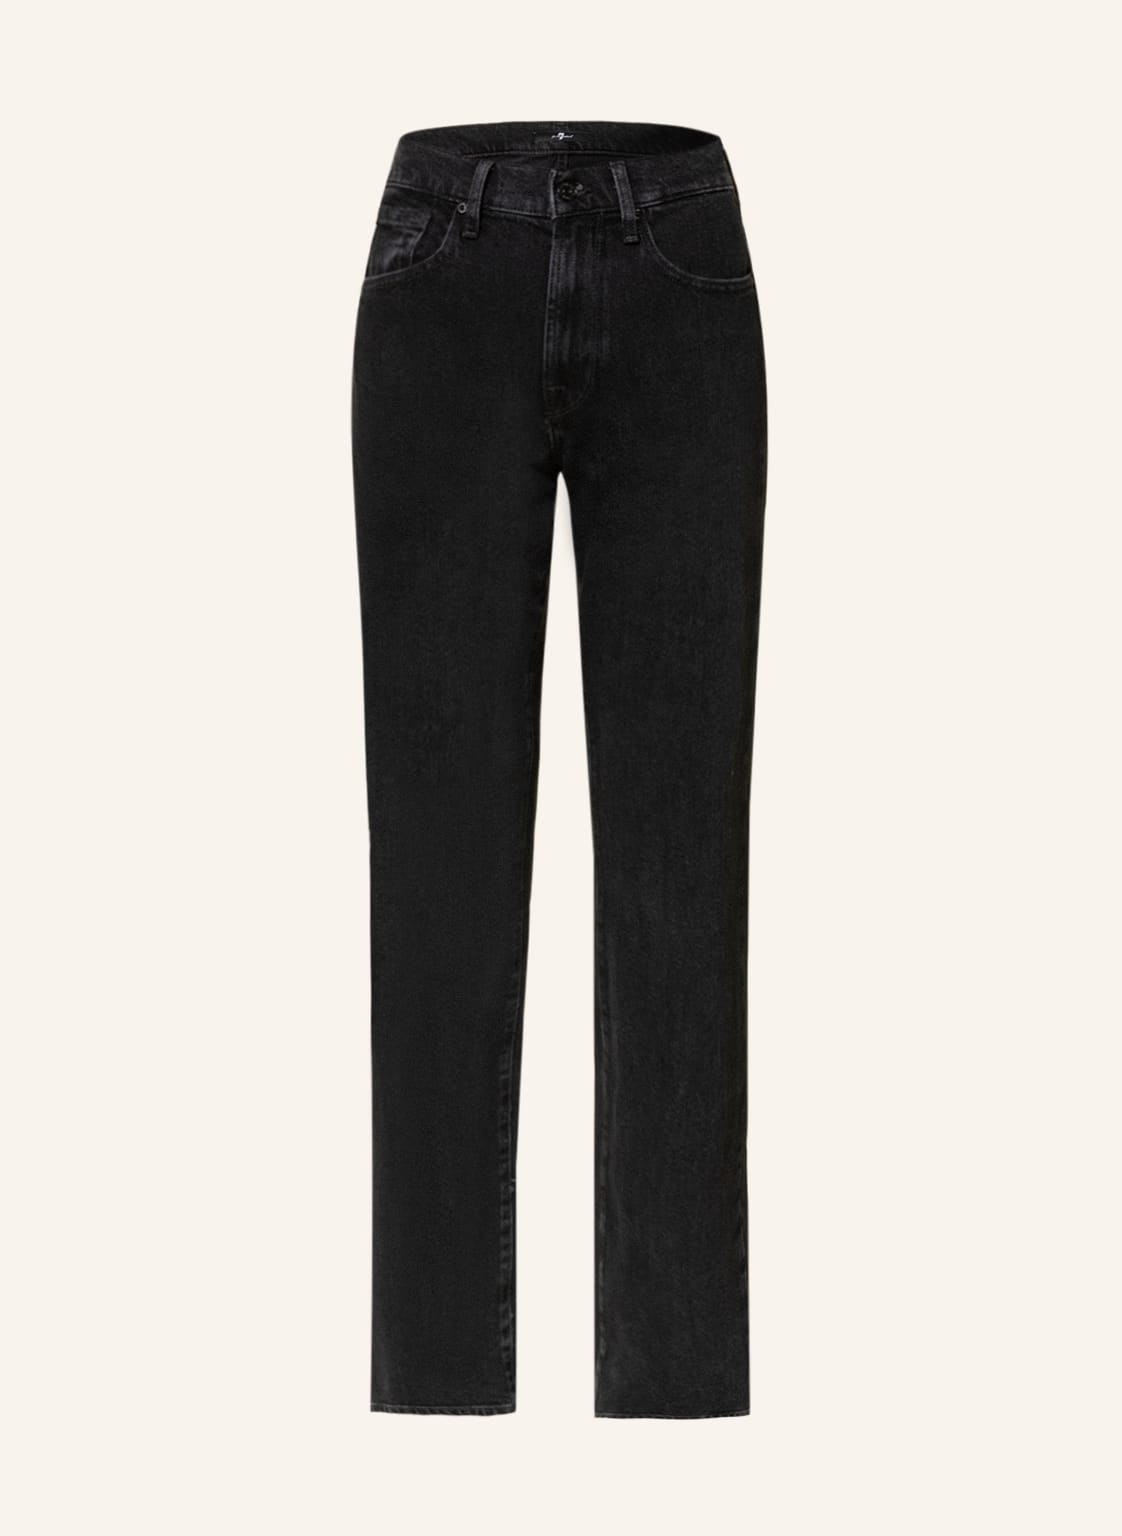 Image of 7 For All Mankind Jeans Tess Trouser schwarz